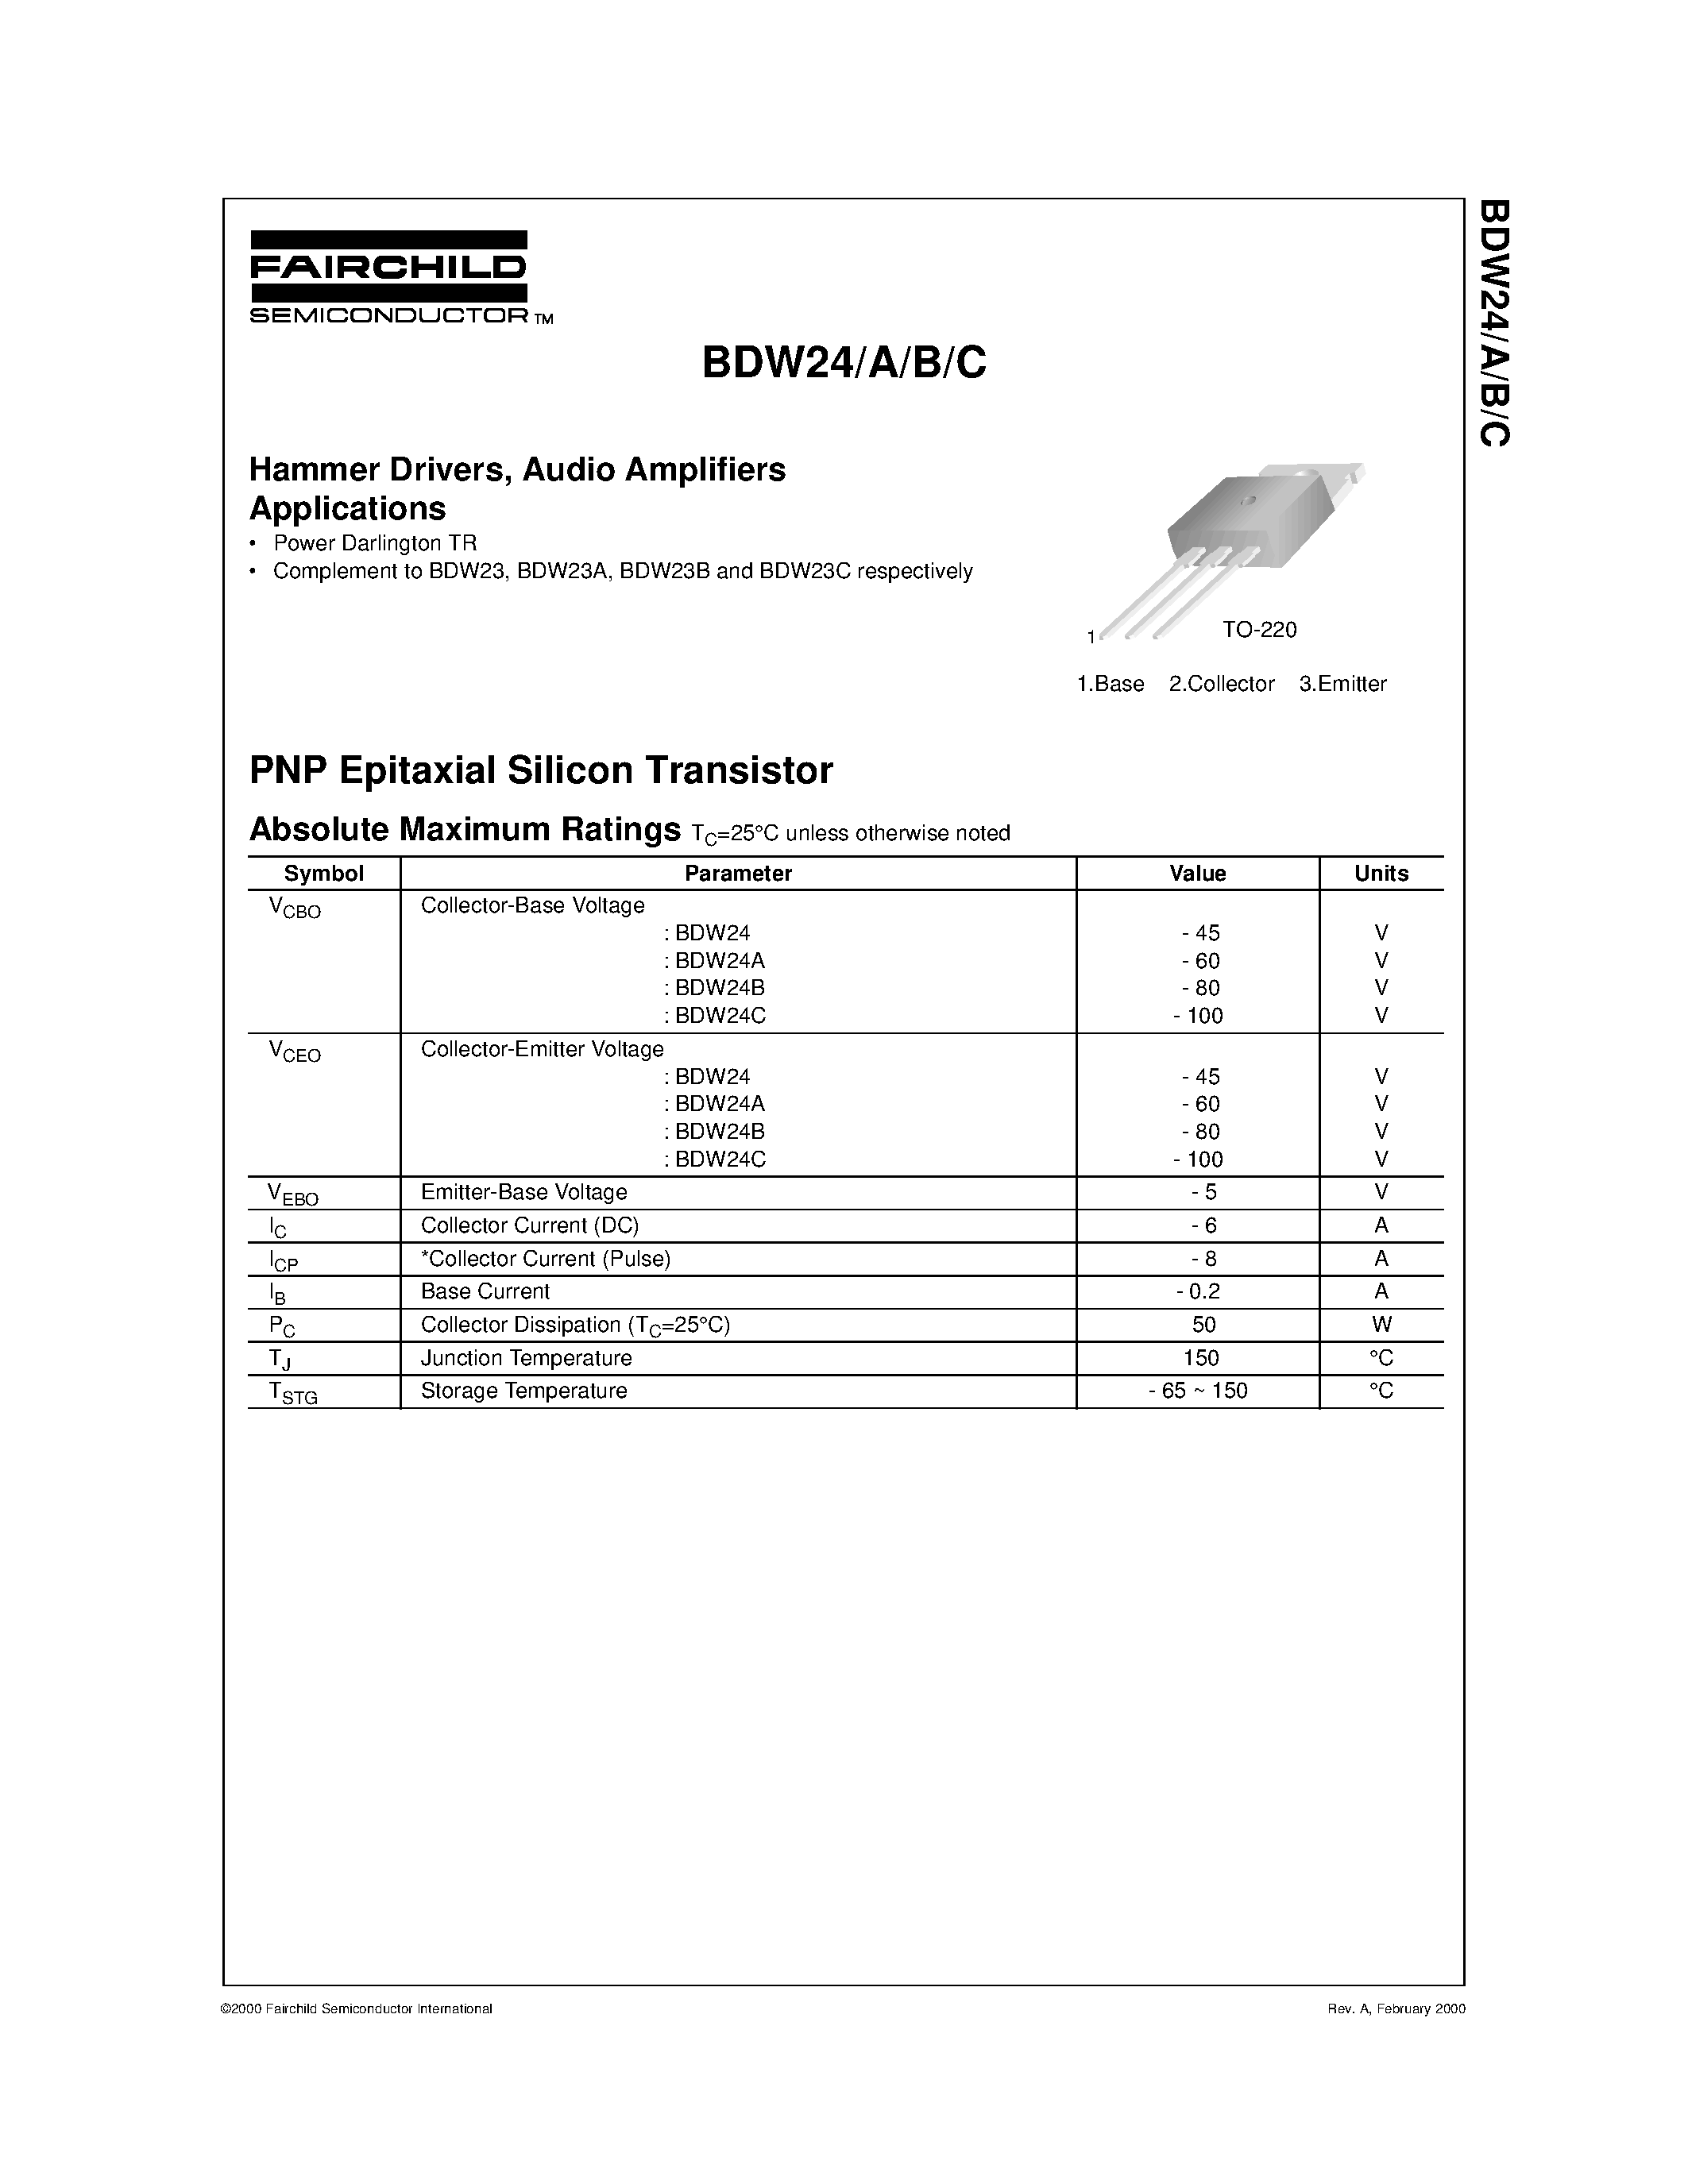 Datasheet BDW24 - Hammer Drivers/ Audio Amplifiers Applications page 1